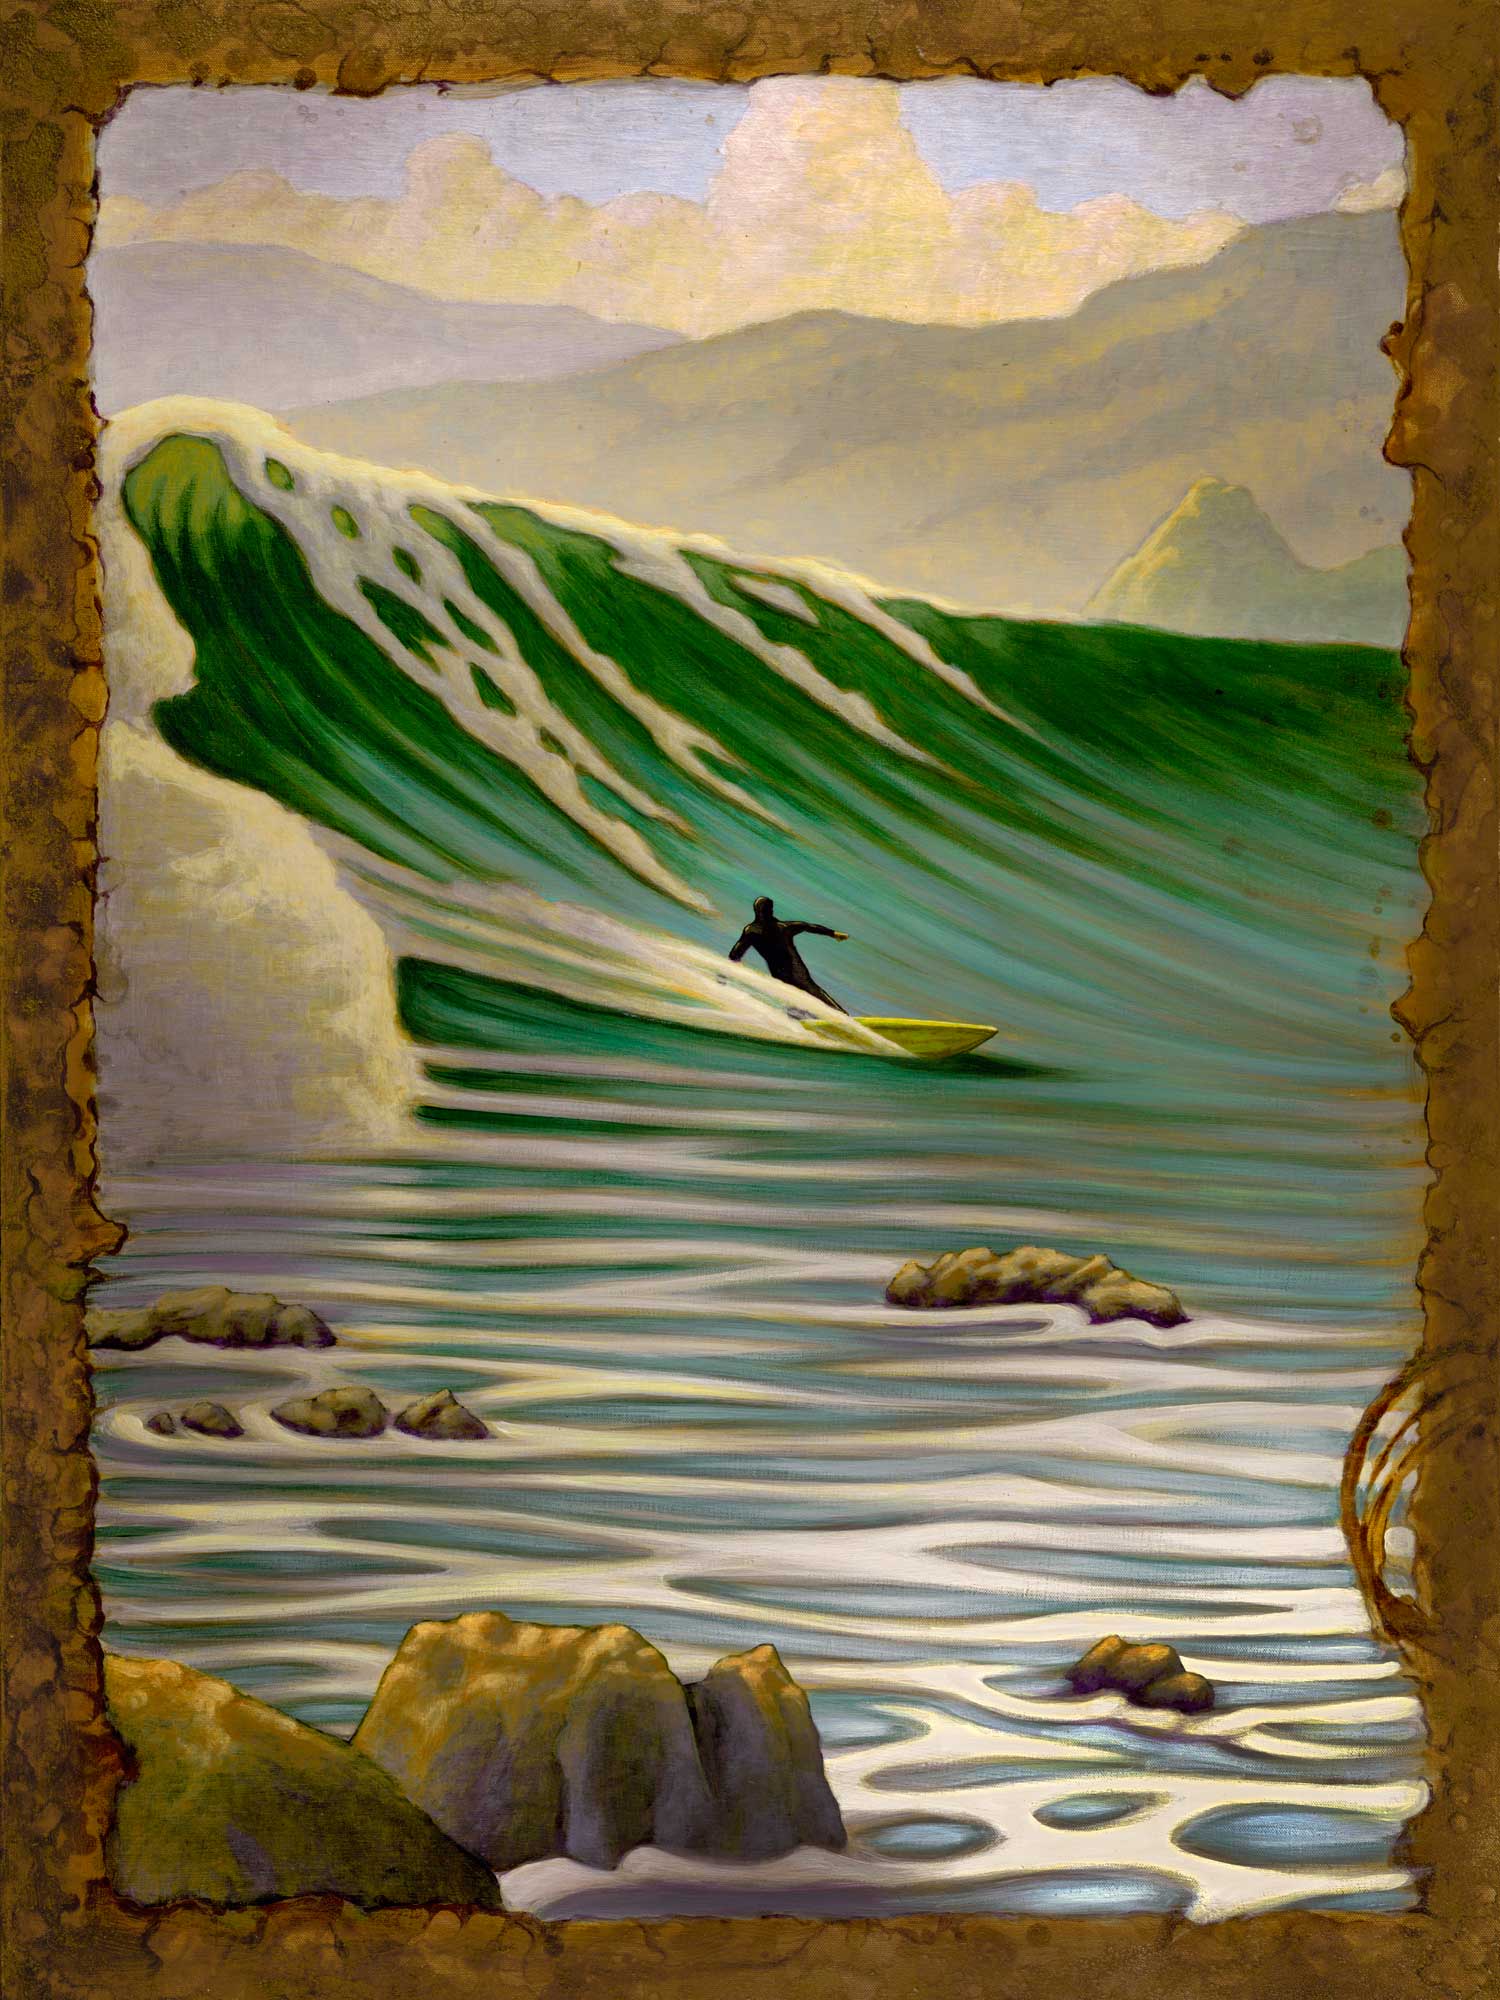 A painting of a surfer on a big wave at Patrick's point on the Humboldt county coast of northern California